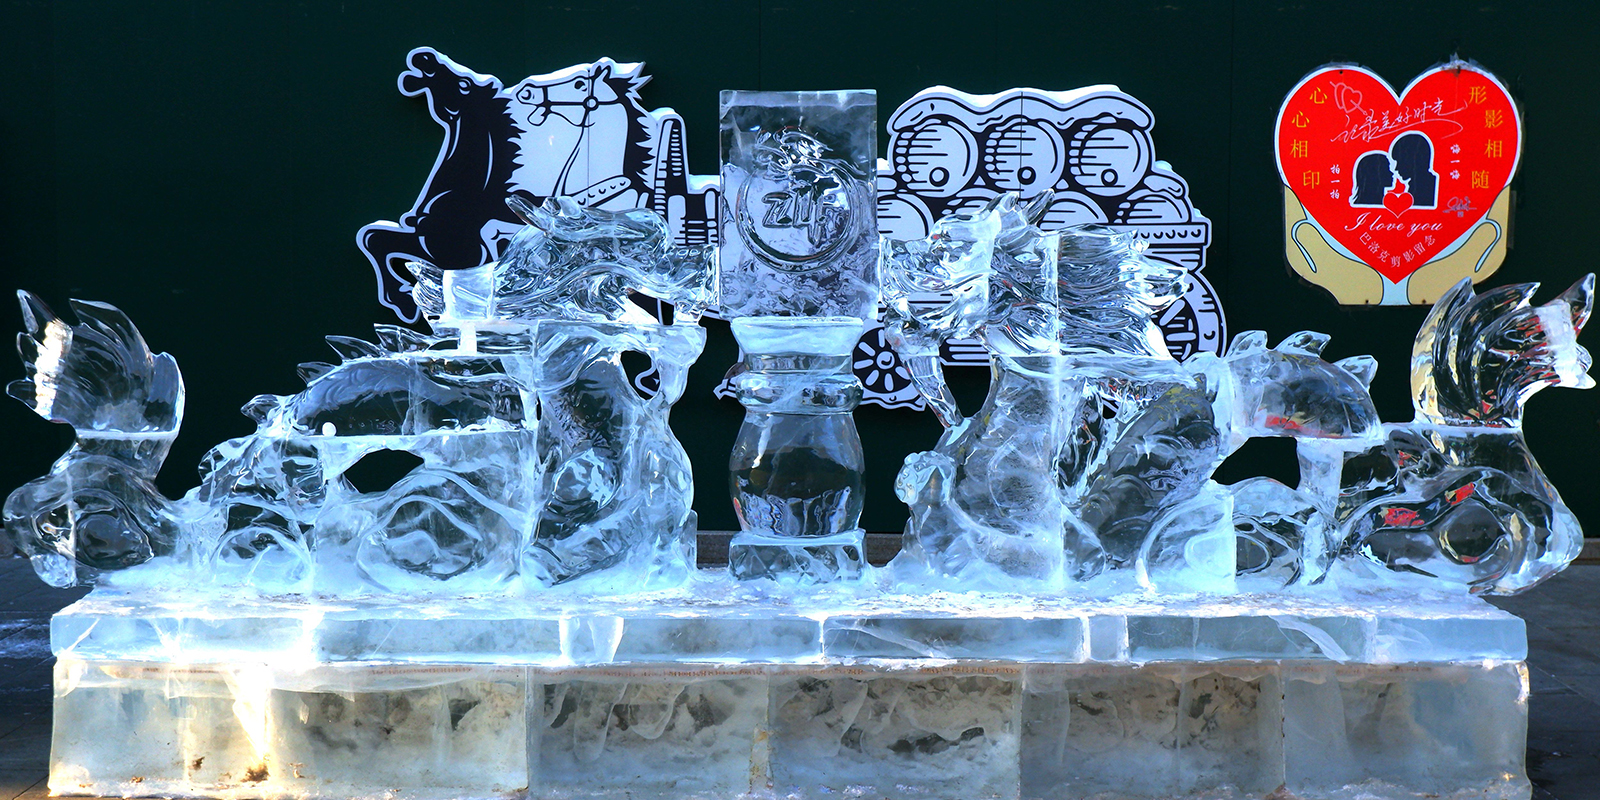 A loong-themed ice sculpture is on display at the Laodaowai baroque scenic spot in Harbin, Heilongjiang Province on January 16, 2024. /IC